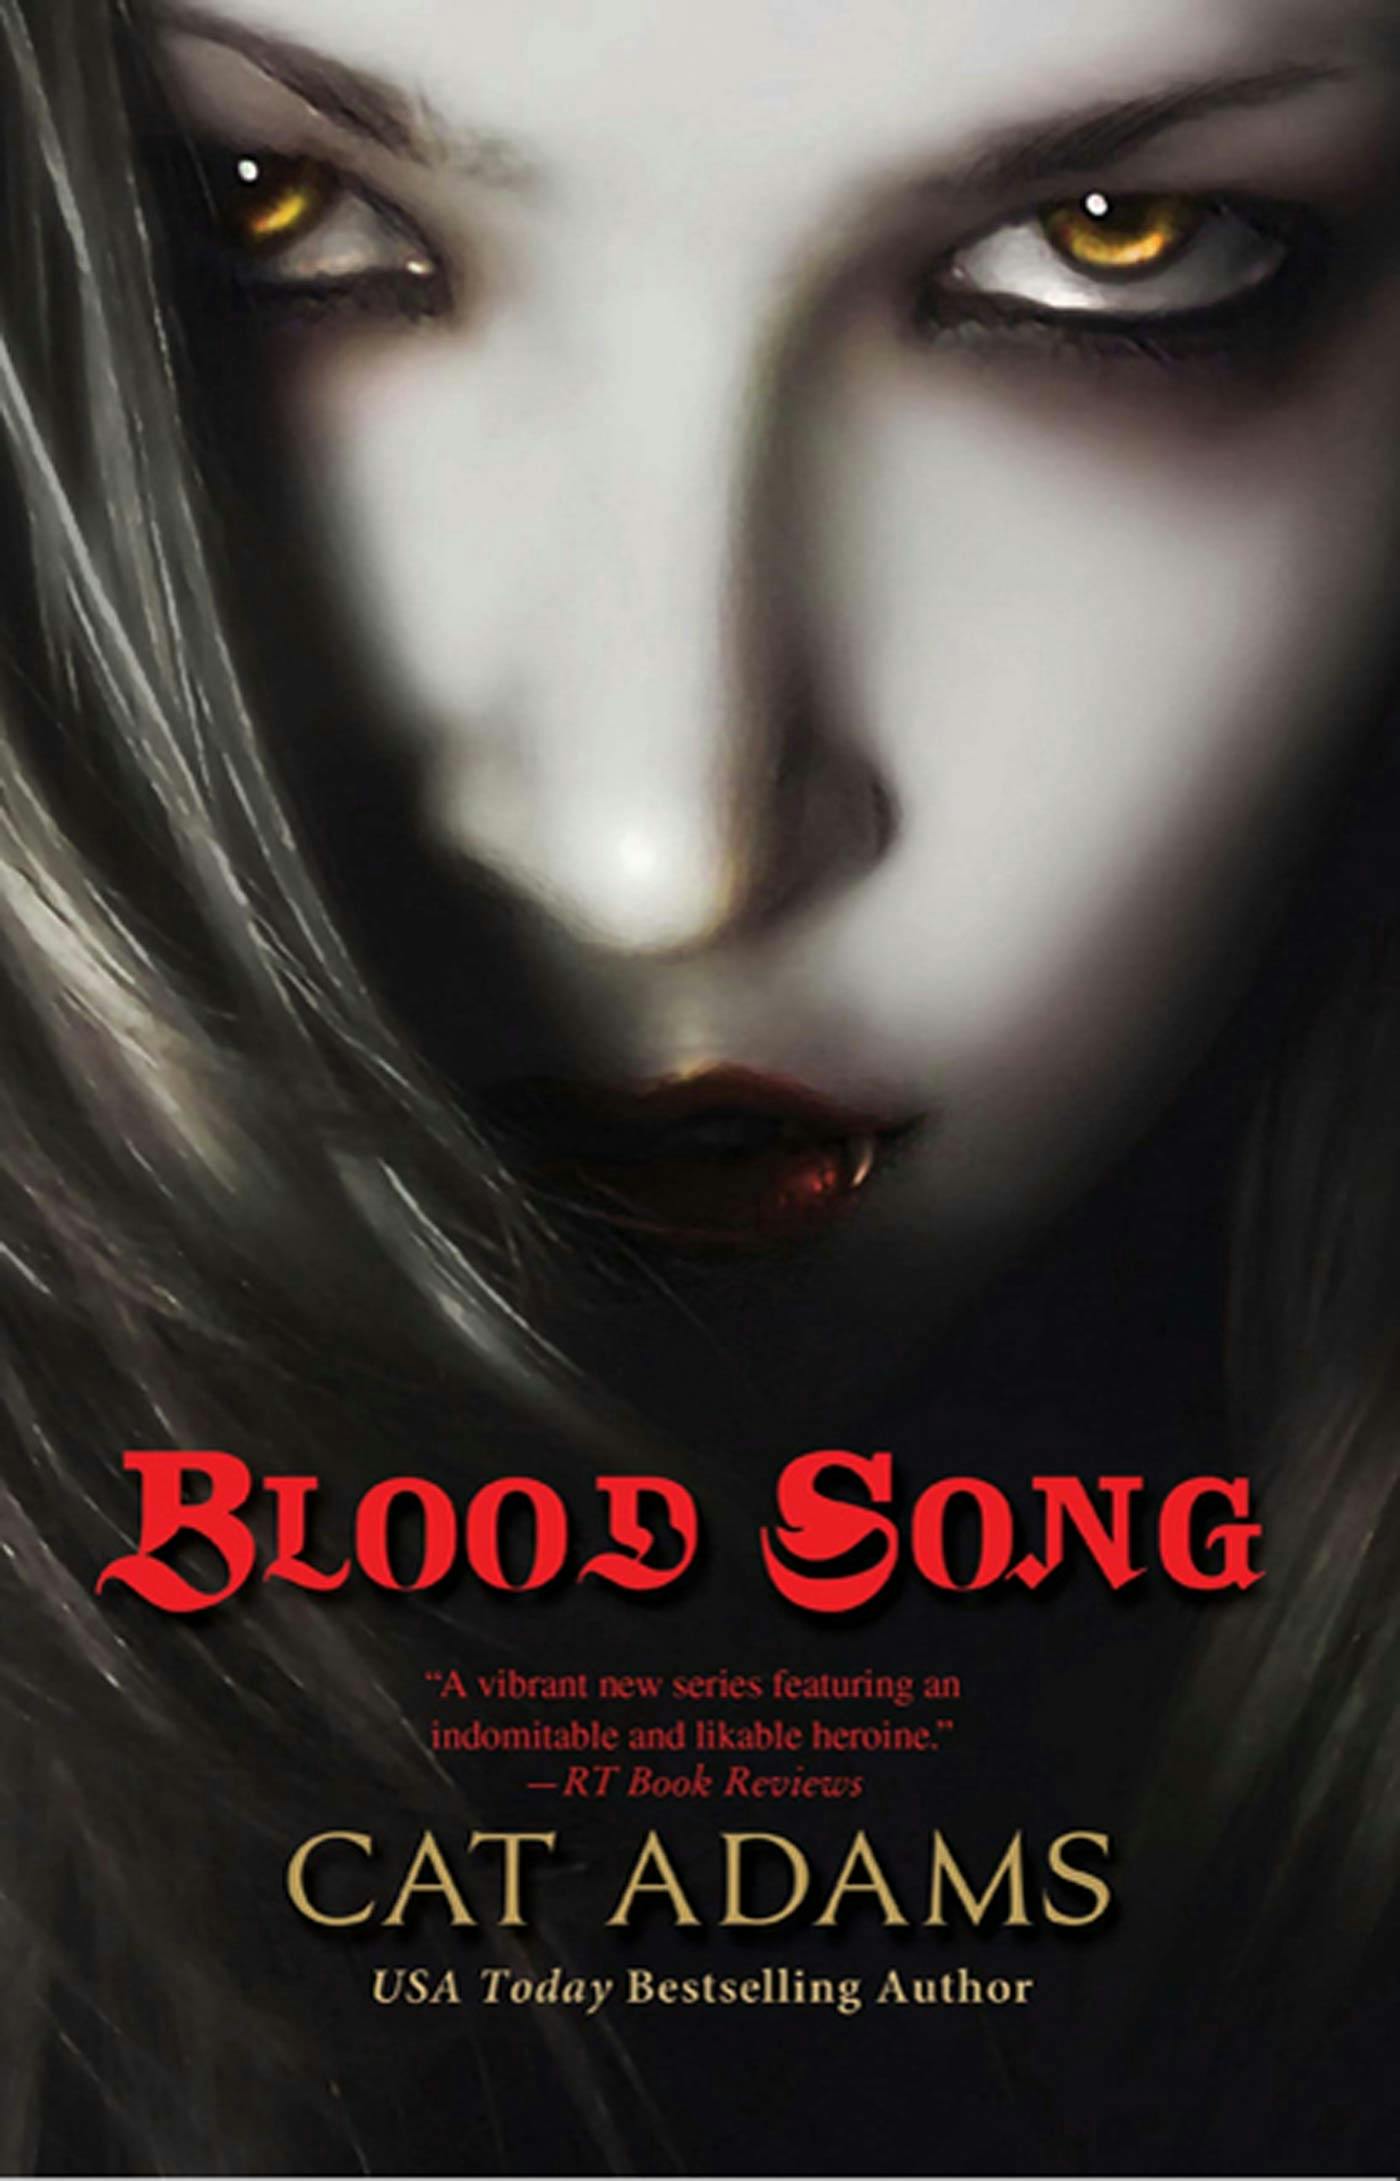 Cover for the book titled as: Blood Song